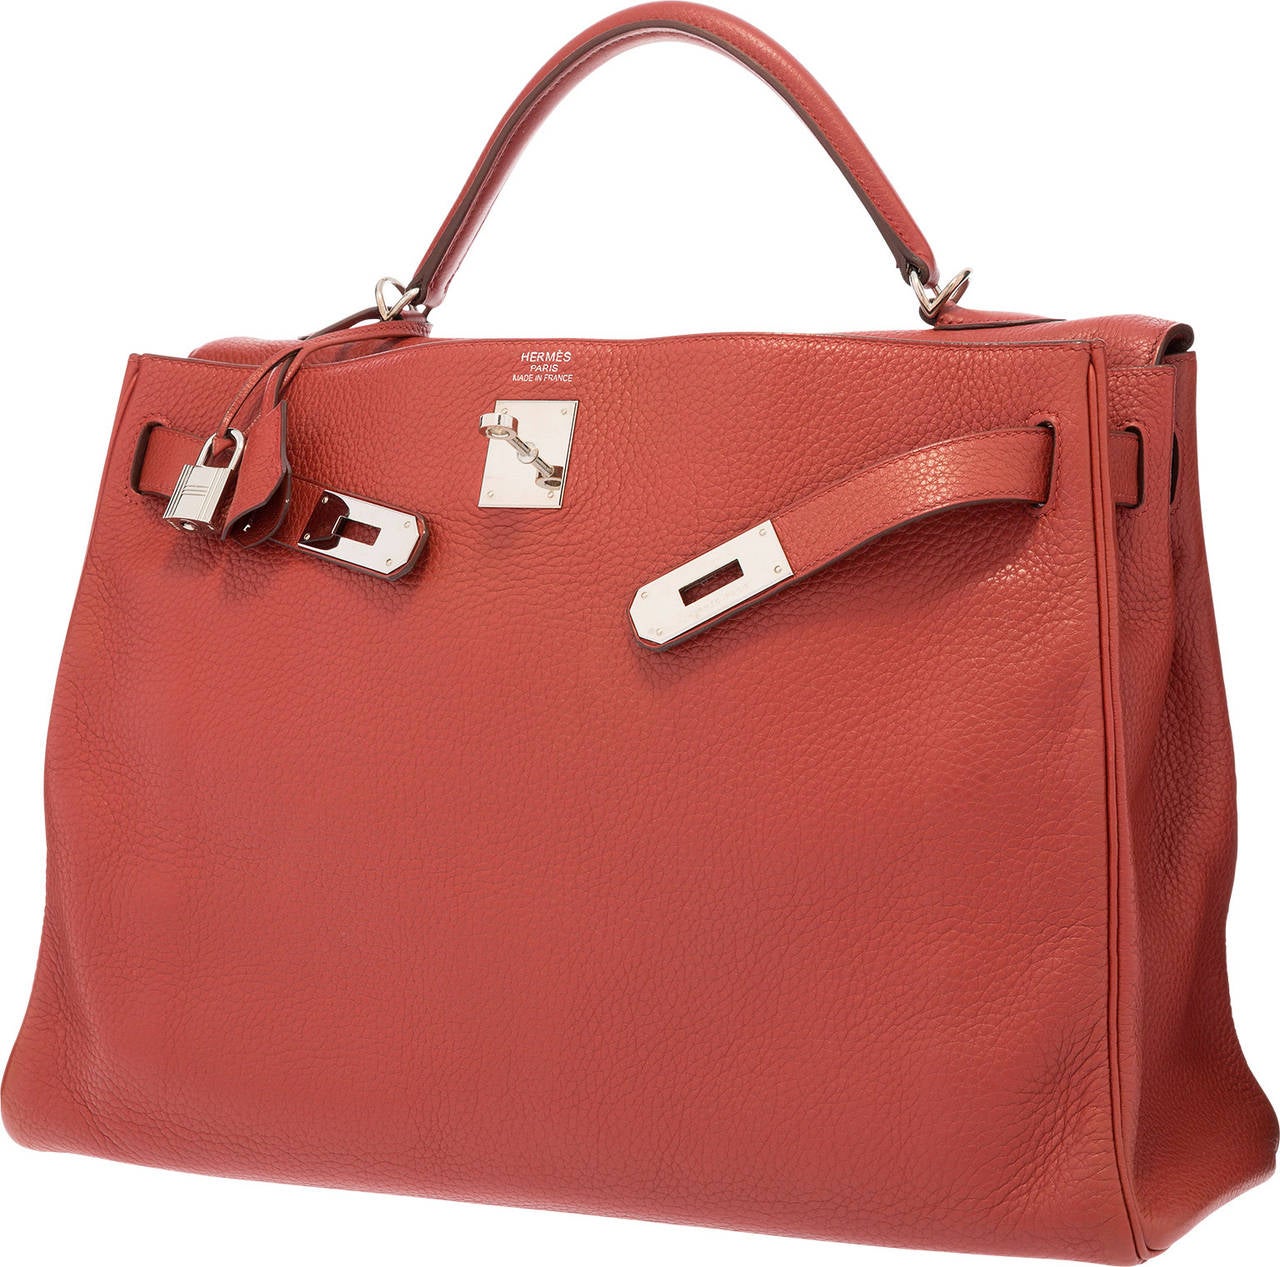 A rare coloration that is the perfect shade of red for any number of looks, Rouge Venetian is a creamy red that functions as both a neutral and a bright accent. This bag is done in Clemence Leather as well, making it an easy bag to dress up or wear